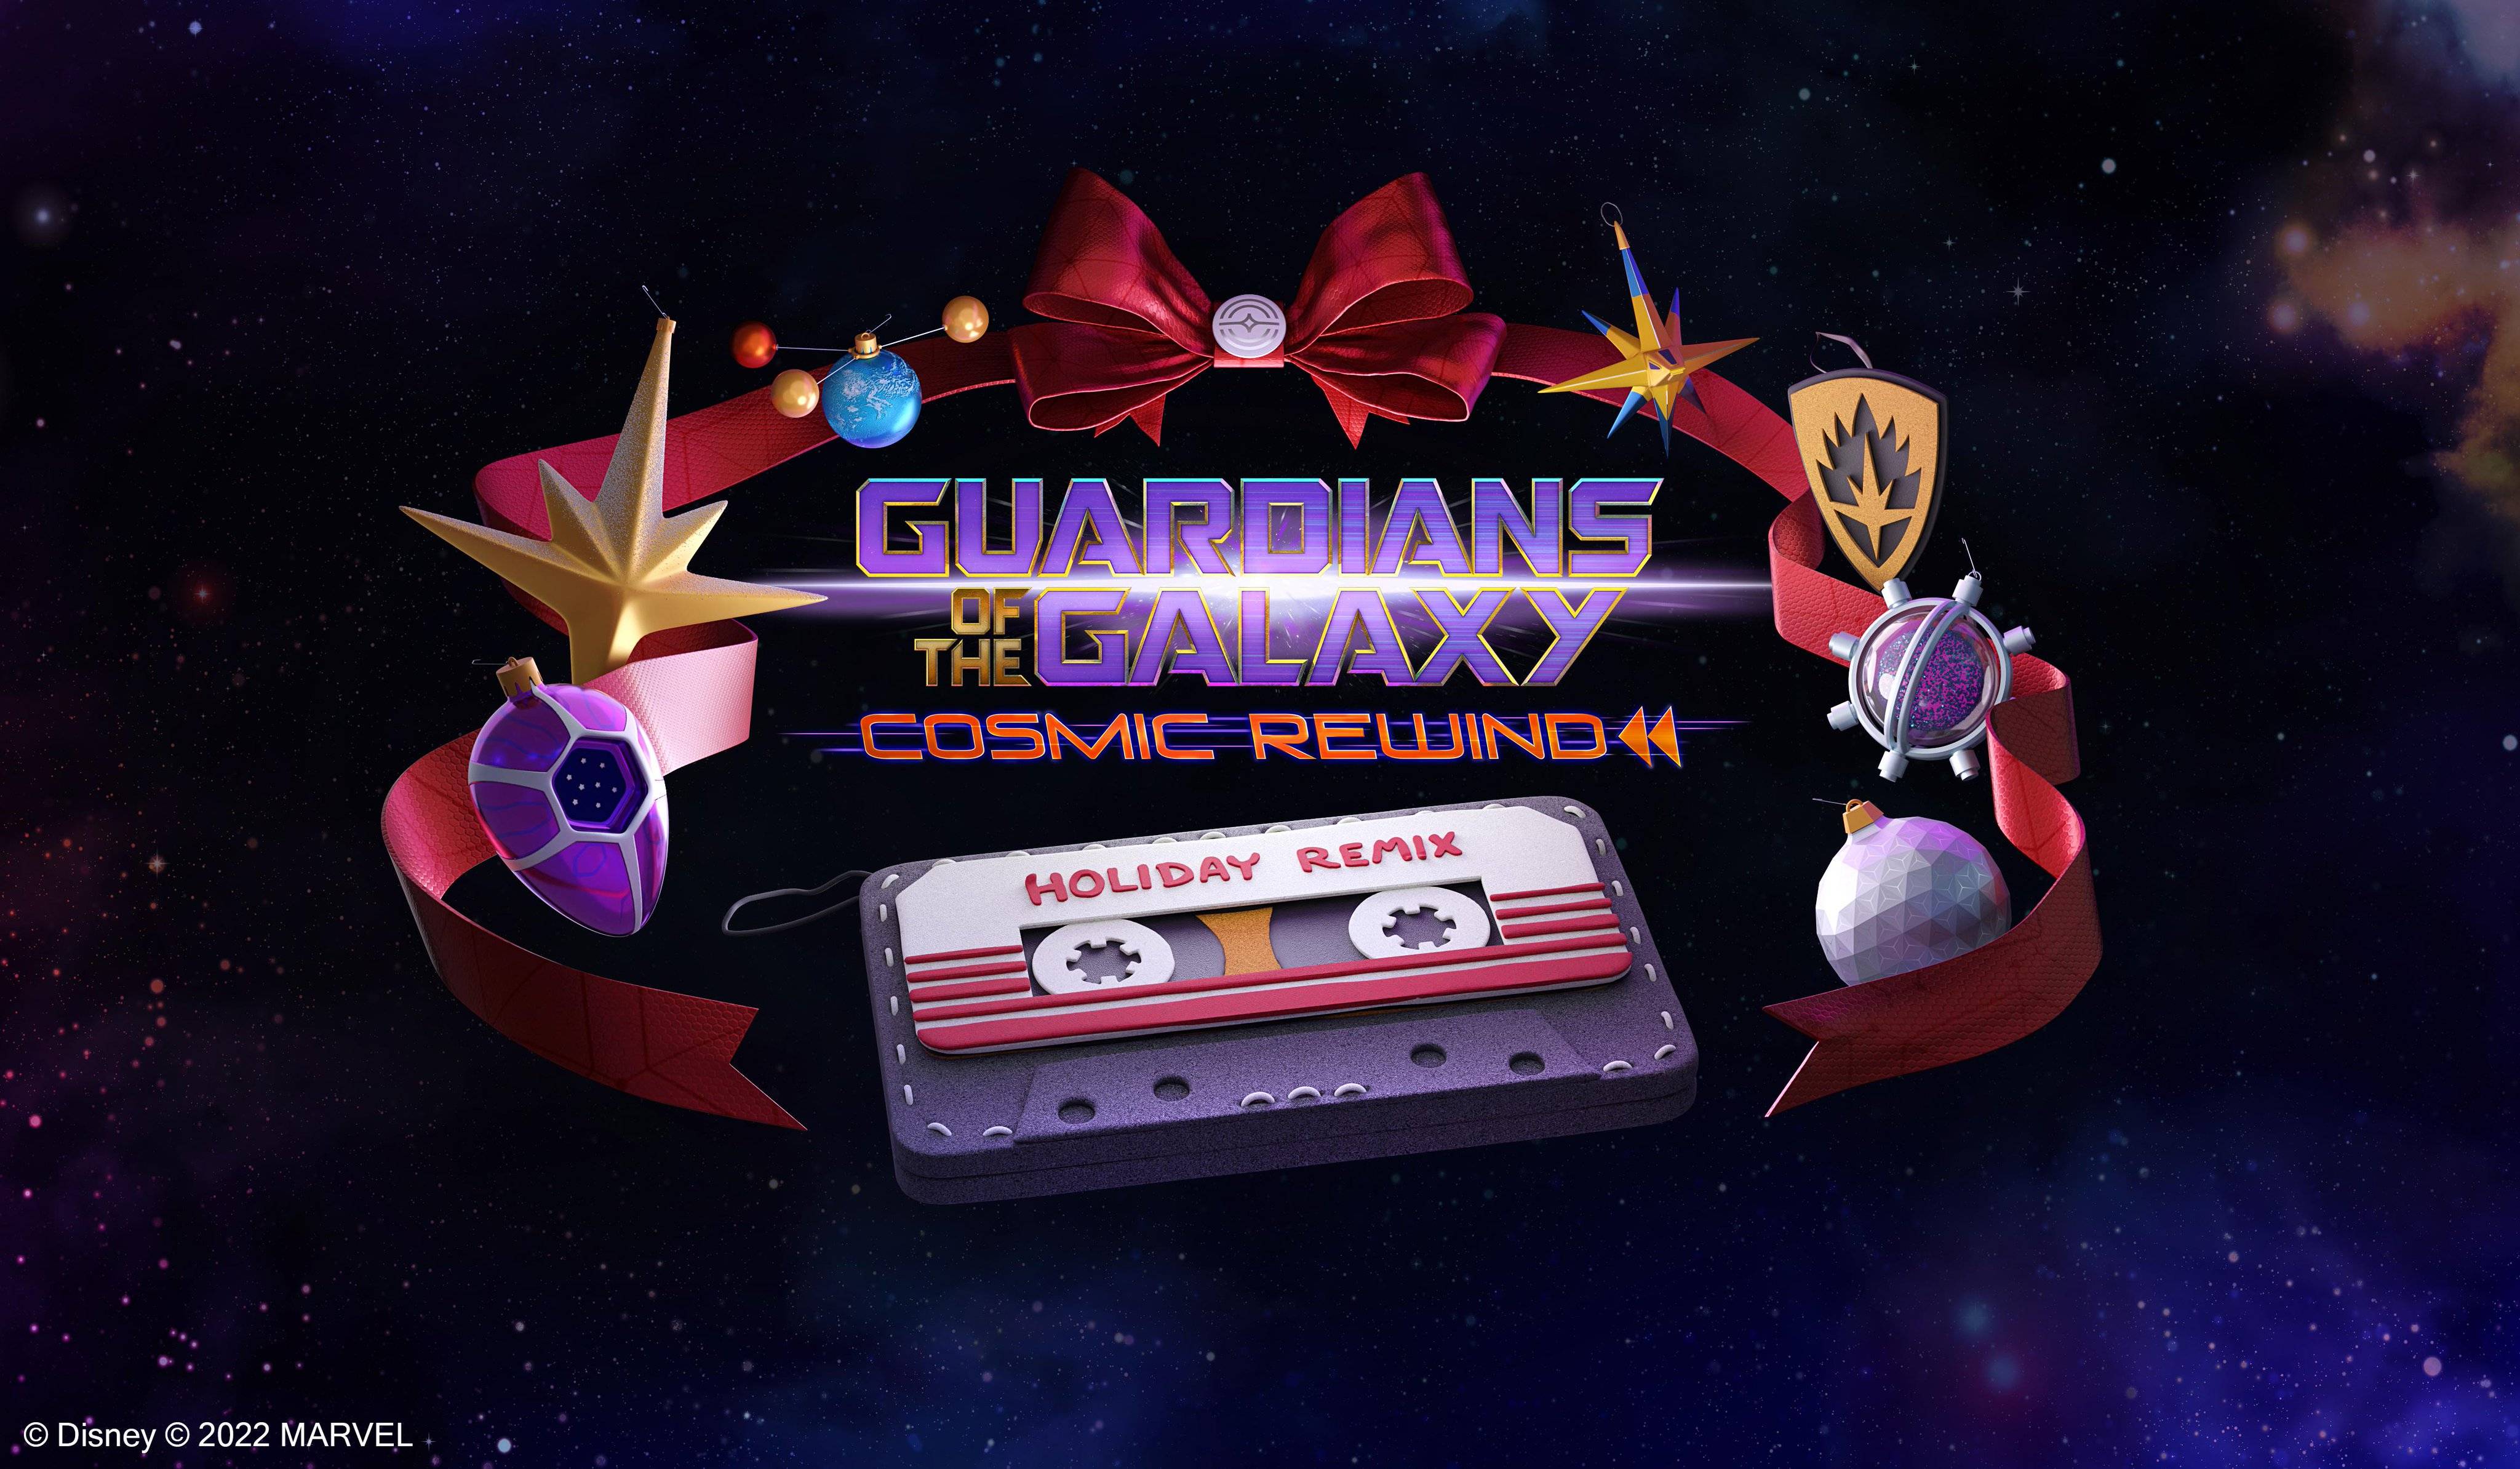  Guardians of the Galaxy Cosmic Rewind Holiday Remix poster